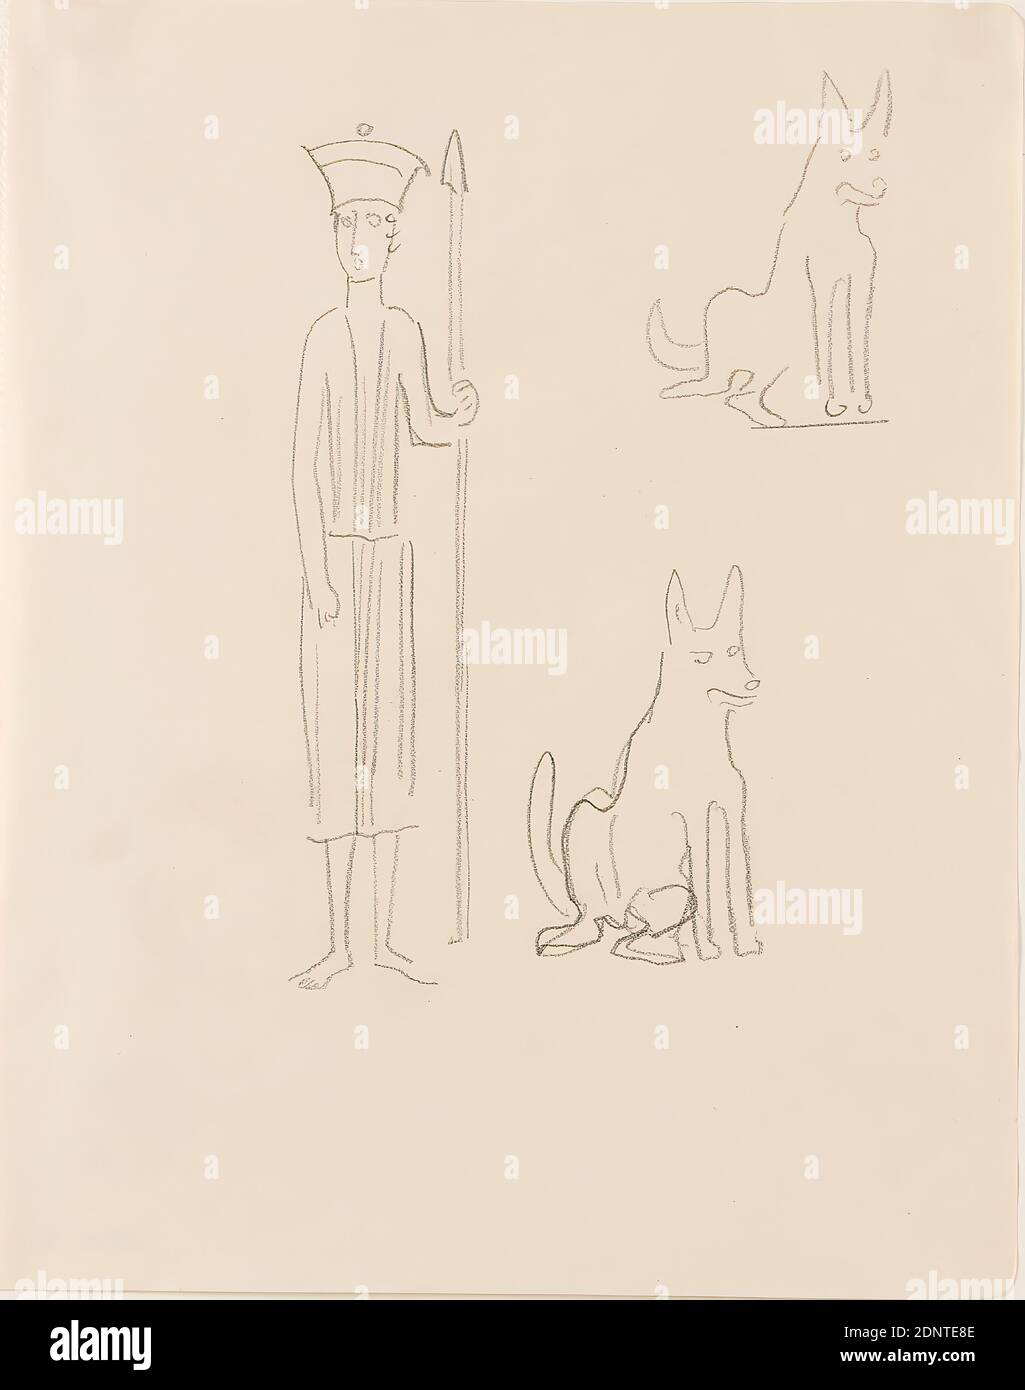 Gustav Heinrich Wolff, Sketches of a standing figure with lance and two dogs or wolves, pencil, paper, drawing, pencil on paper, Total: Height: 22,1 cm; Width: 17,2 cm, drawing, graphics, sketches, standing figure, human and animal, dog, wolf, lance, classic modernism, Three sketches on one sheet: Guardian figure with hat and lance and two sitting dogs or wolves, from the sketchbook 1925-26 Stock Photo